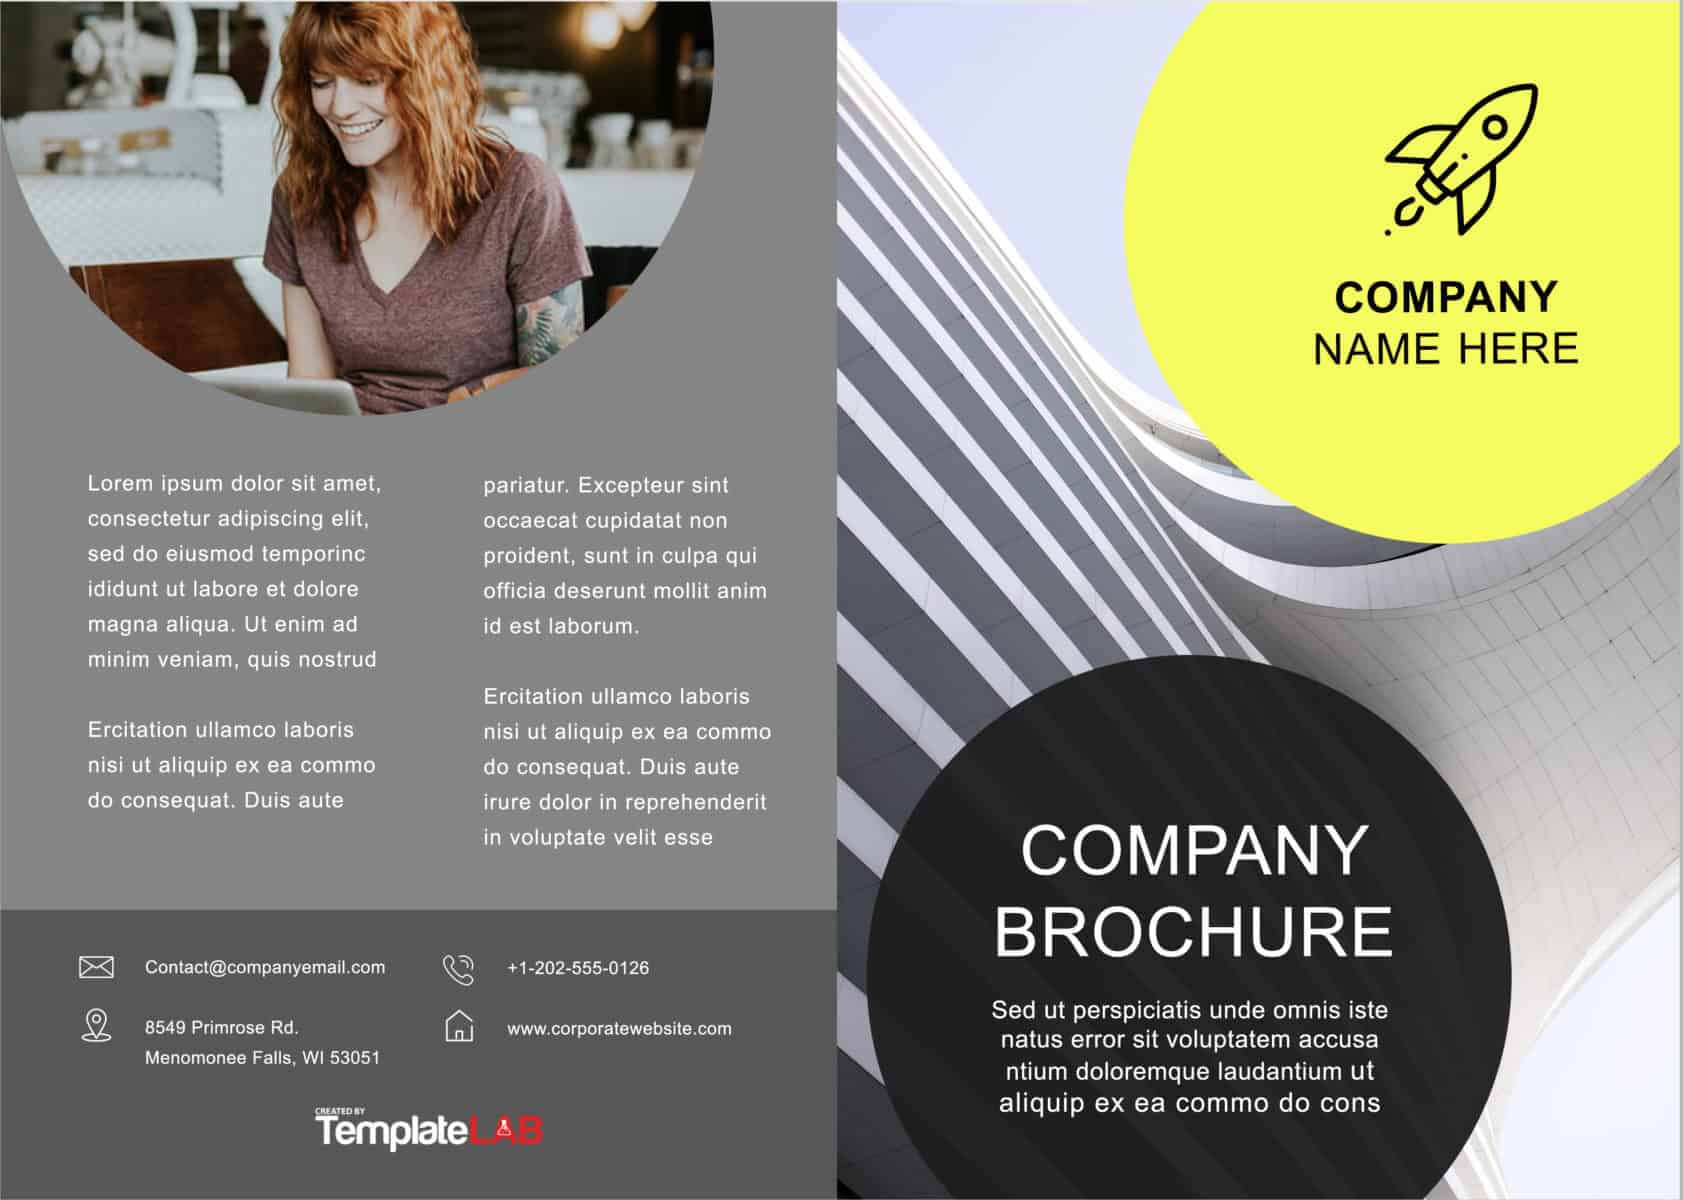 brochure templates for microsoft word 2010